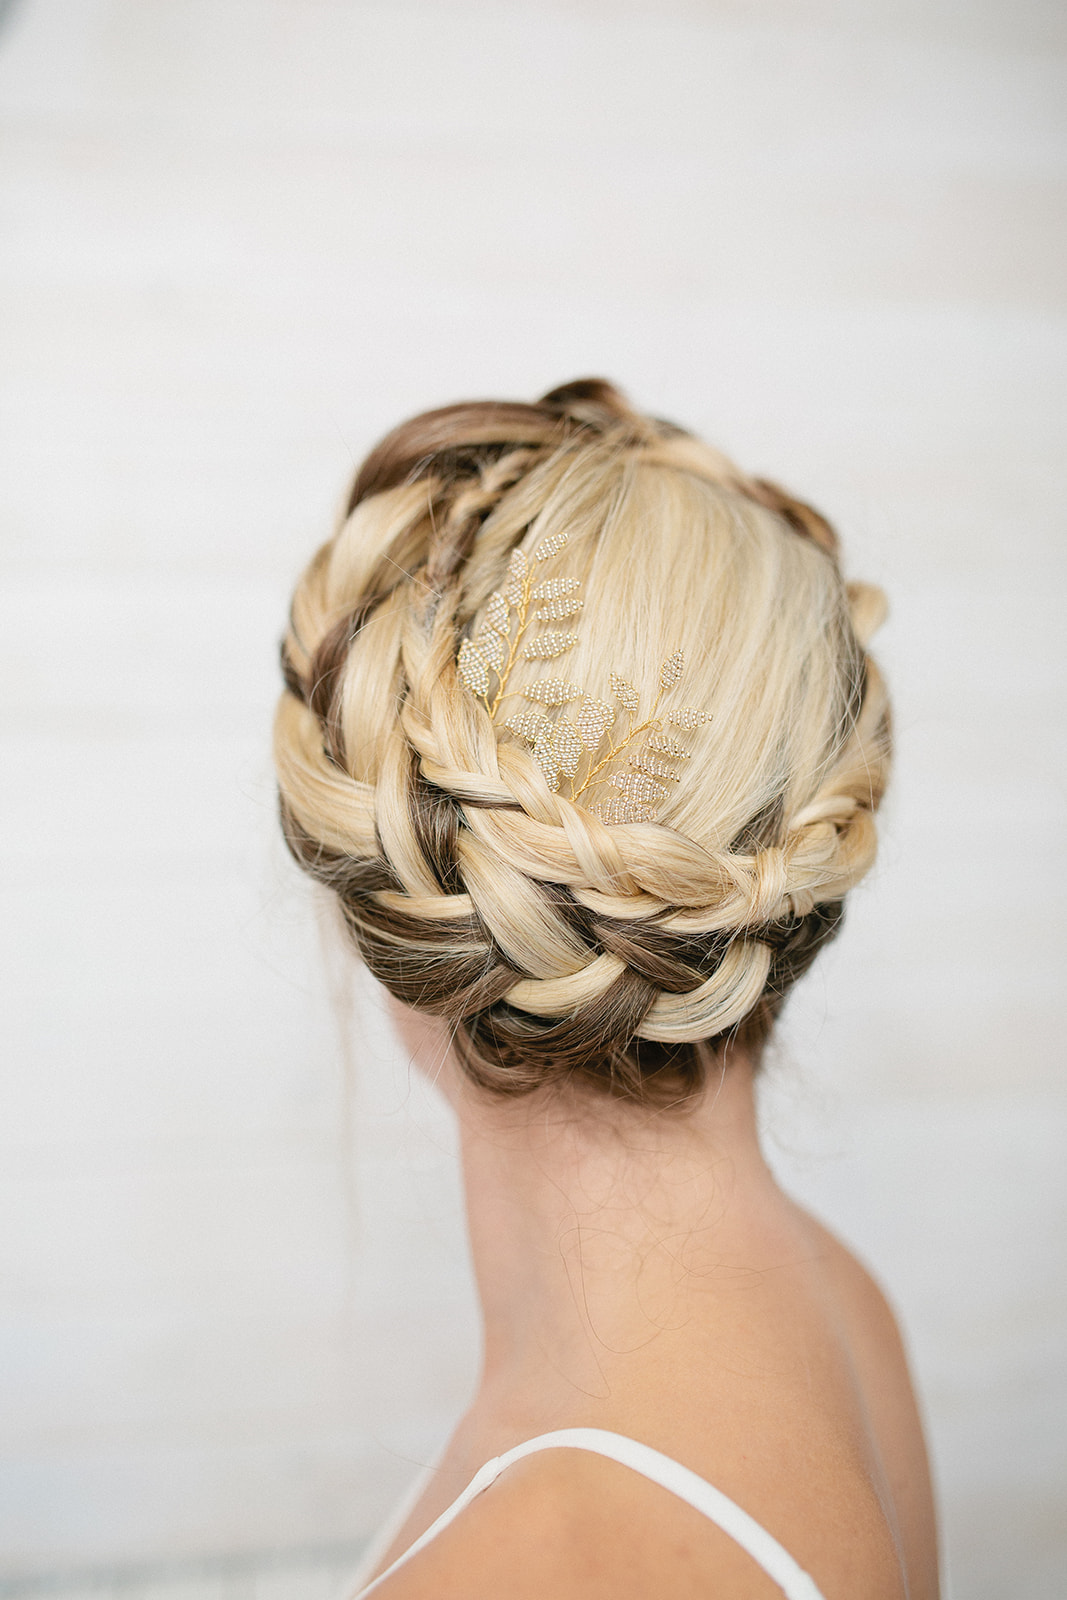 Simply Beautiful Wedding Hair - The Blog - Your Personal Wedding Hair Trial